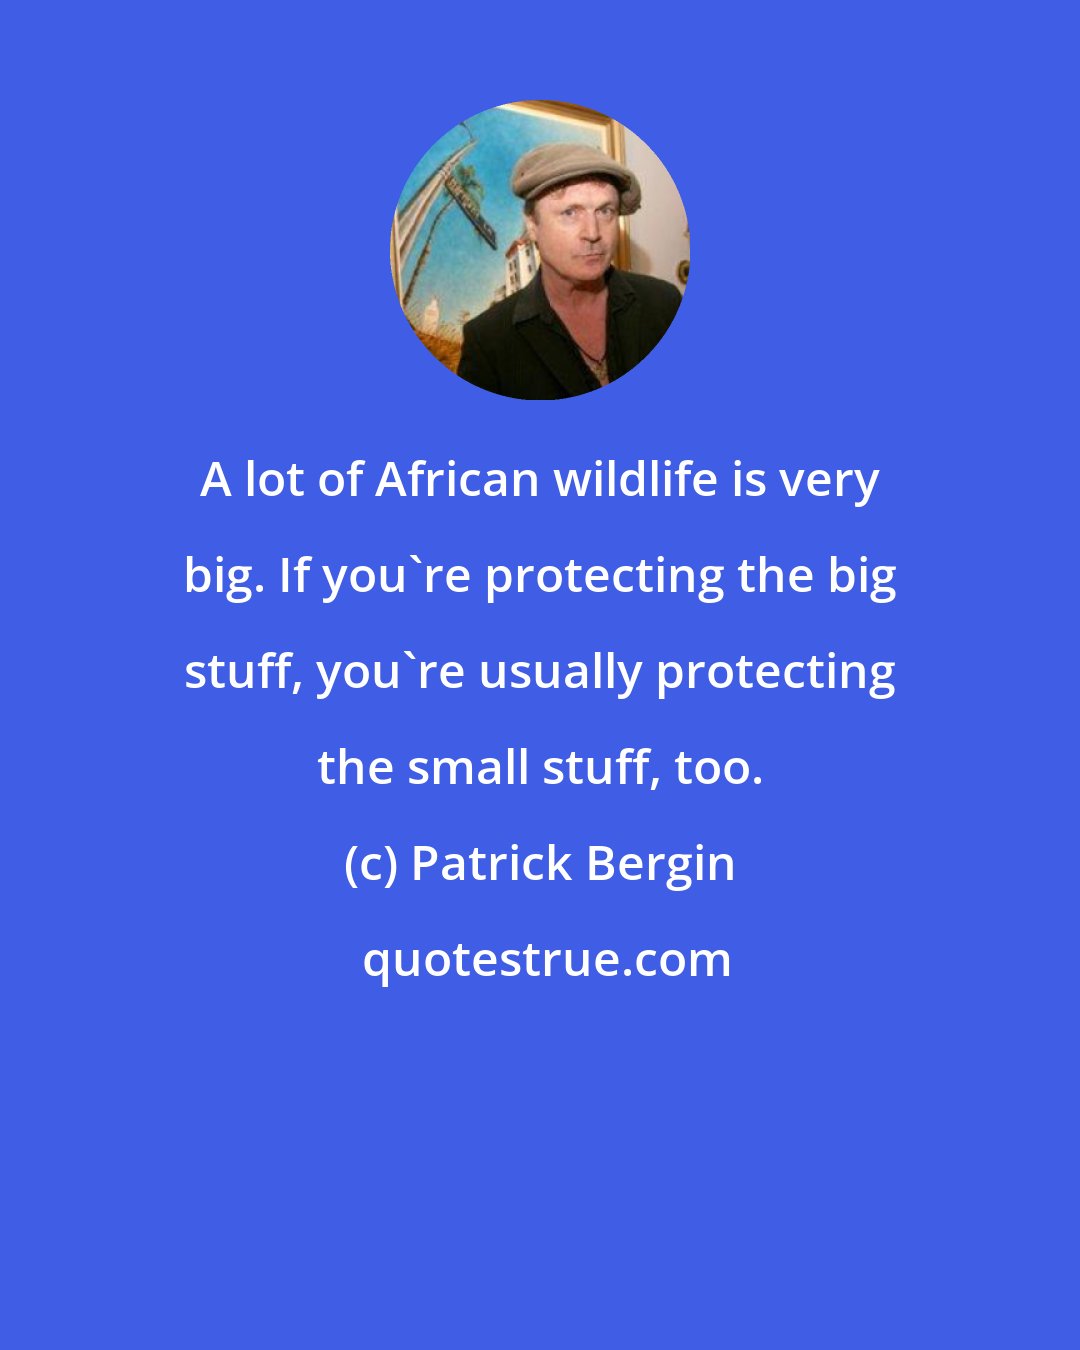 Patrick Bergin: A lot of African wildlife is very big. If you're protecting the big stuff, you're usually protecting the small stuff, too.